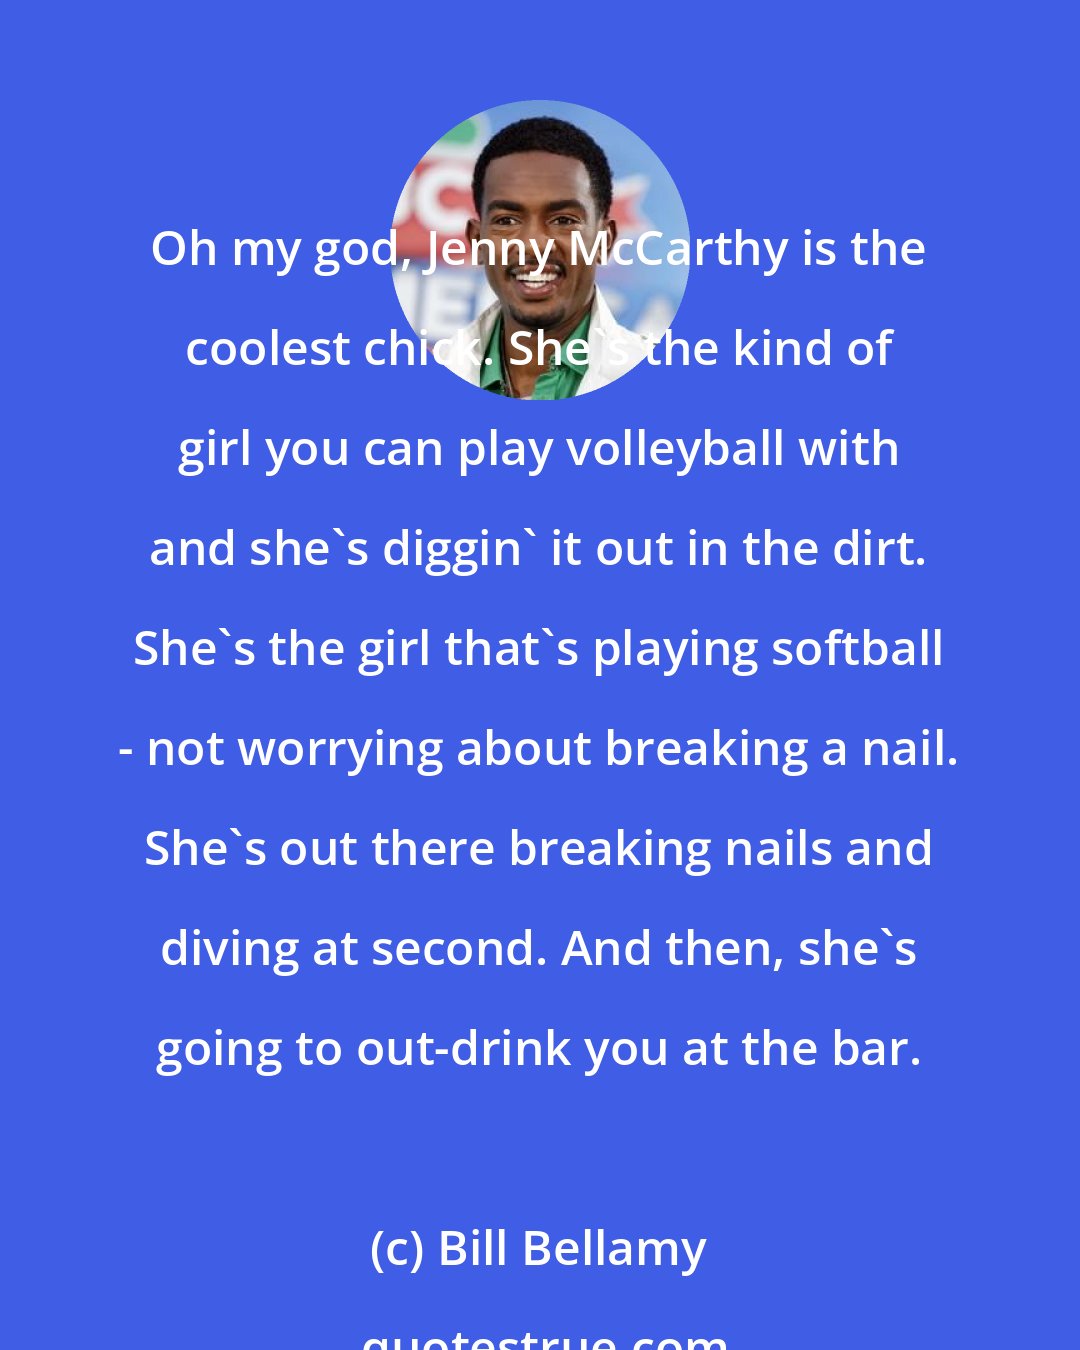 Bill Bellamy: Oh my god, Jenny McCarthy is the coolest chick. She's the kind of girl you can play volleyball with and she's diggin' it out in the dirt. She's the girl that's playing softball - not worrying about breaking a nail. She's out there breaking nails and diving at second. And then, she's going to out-drink you at the bar.